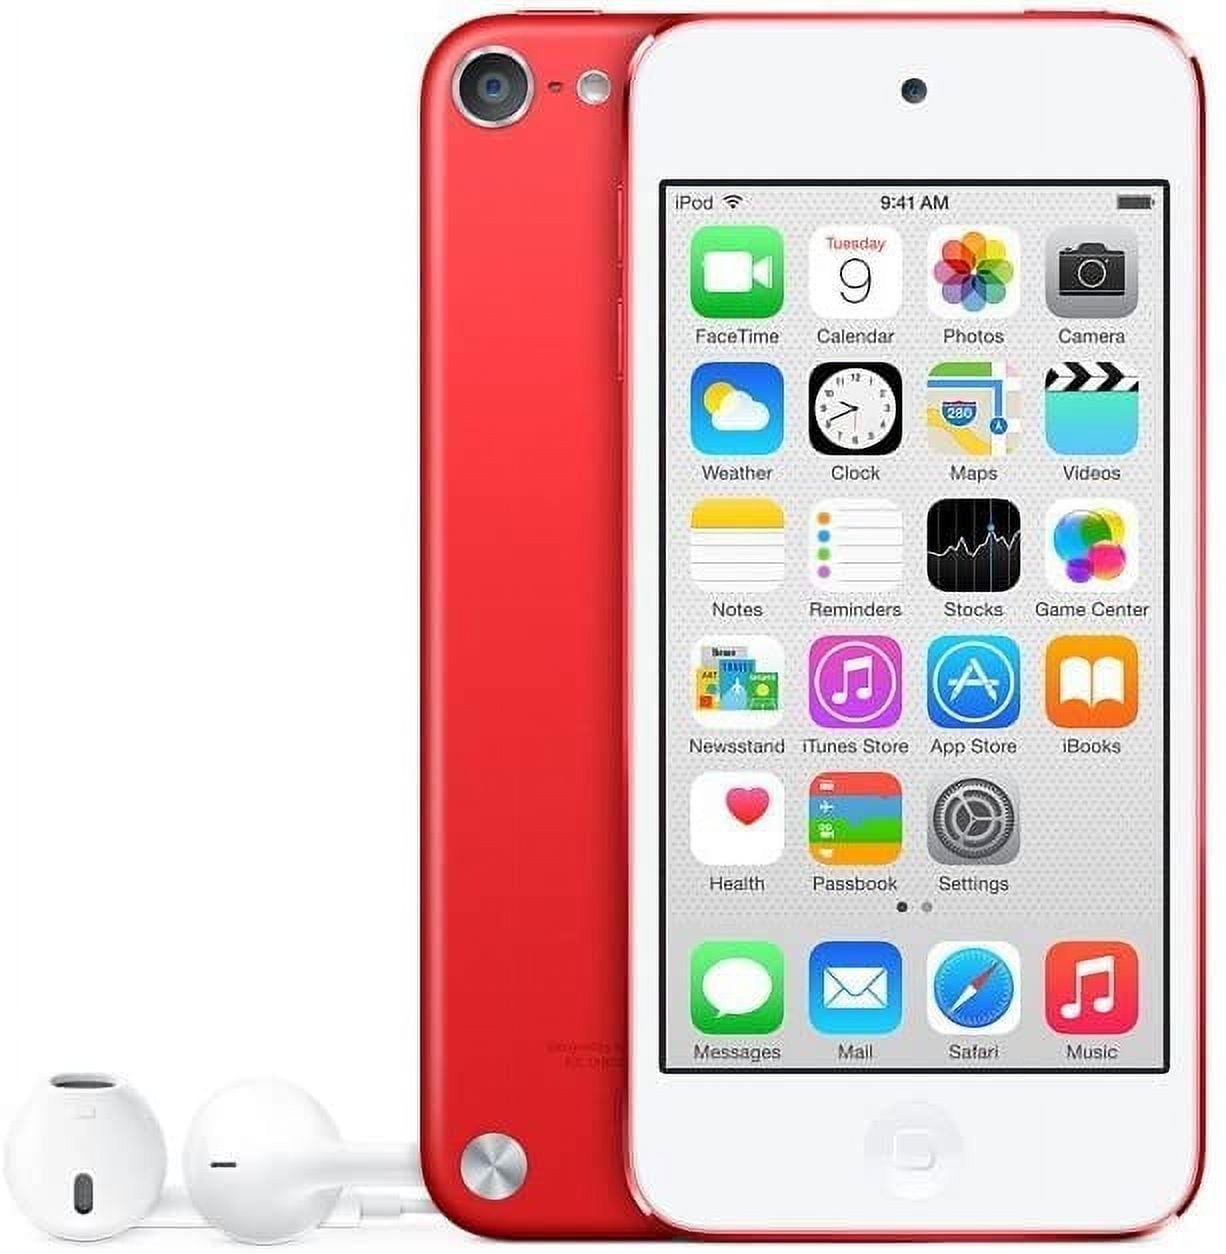 Apple iPod touch 32GB (5th Gen) Red | Used Like New - Walmart.com